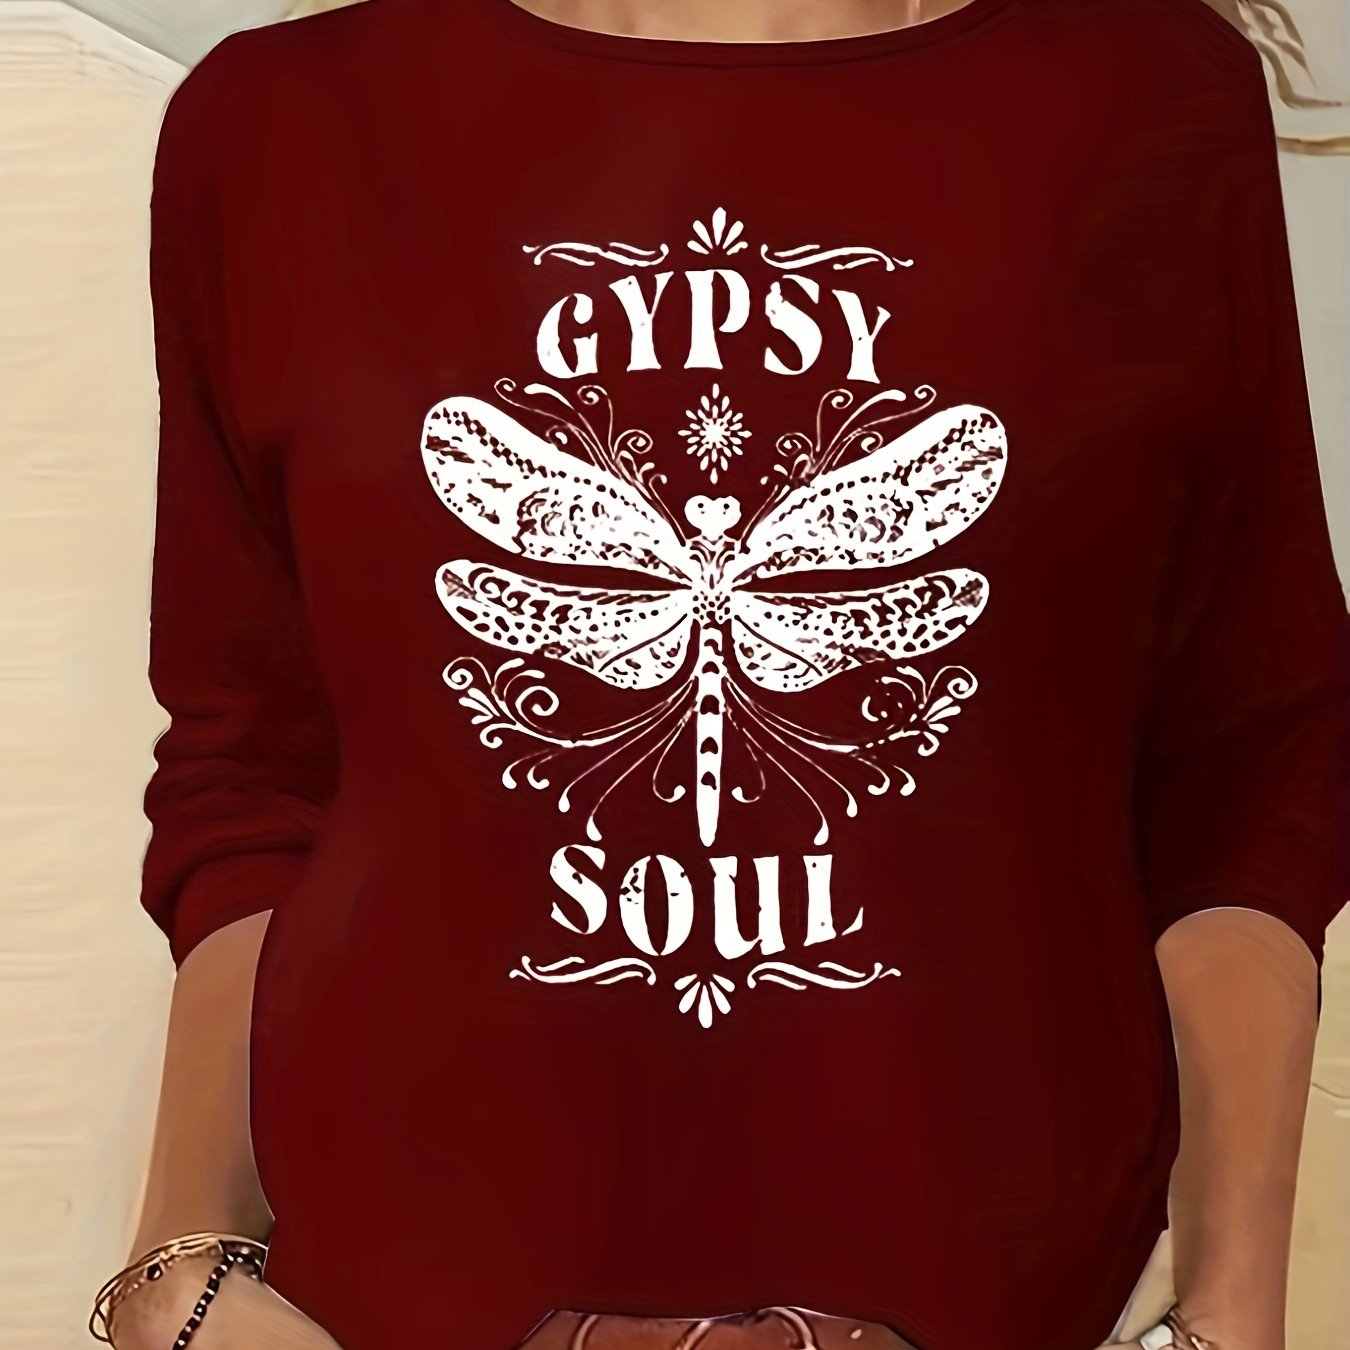 Gypsy Soul Print Long Sleeve T-Shirt, Crew Neck Casual Top For Fall & Spring, Women's Clothing